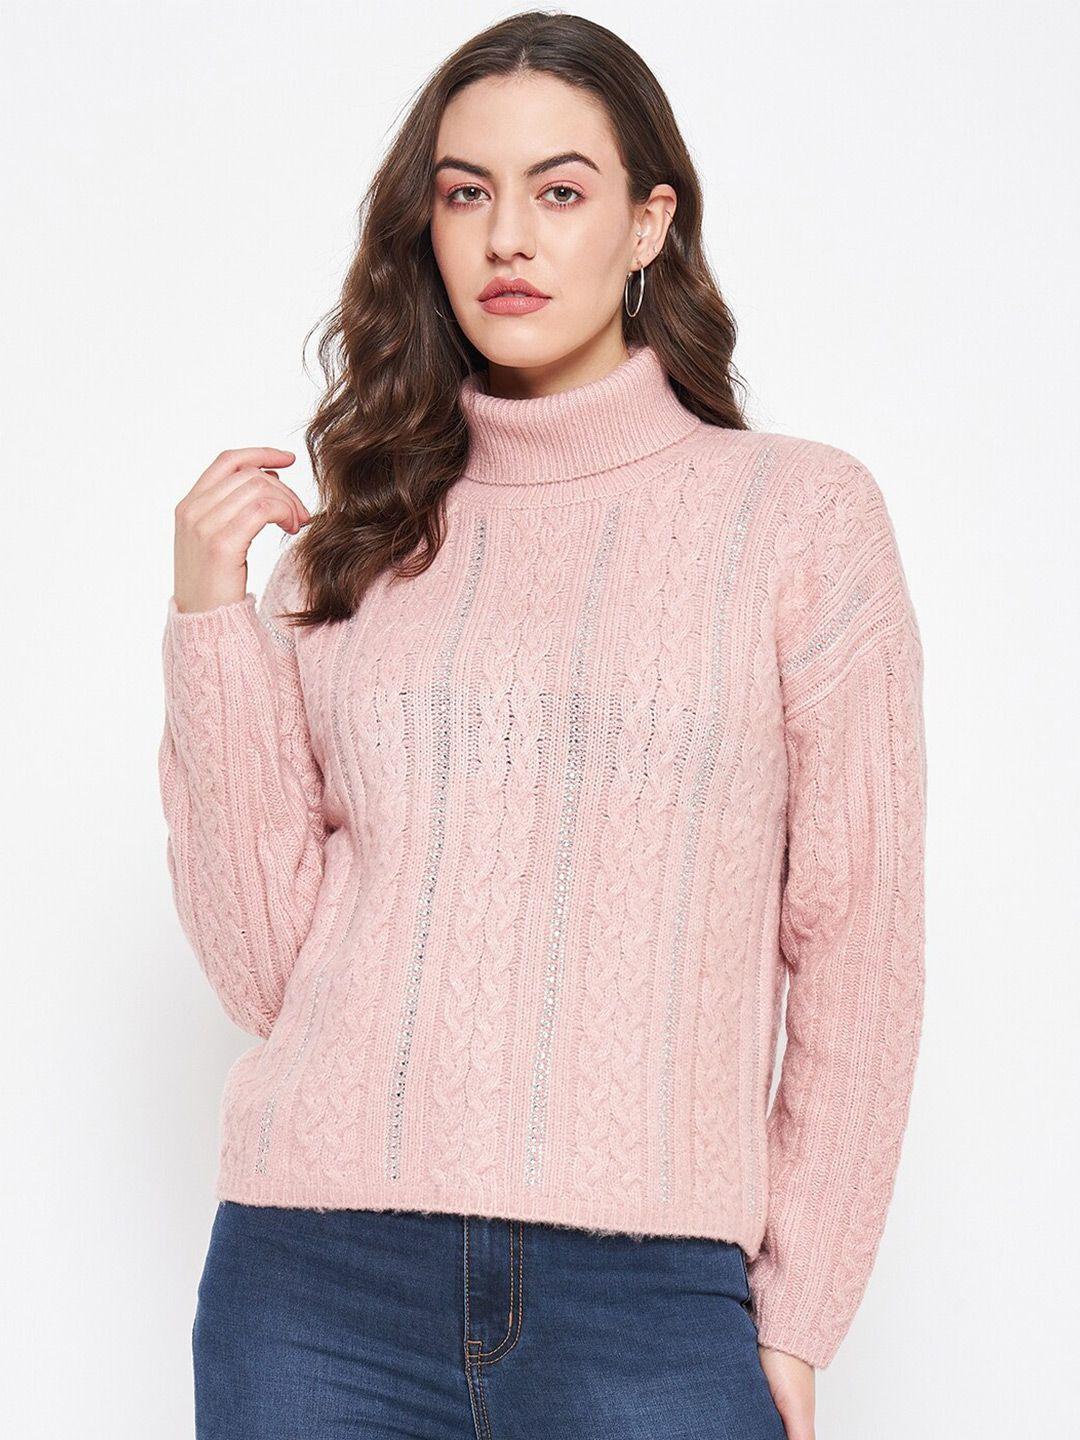 madame cable knit self design turtle neck pullover